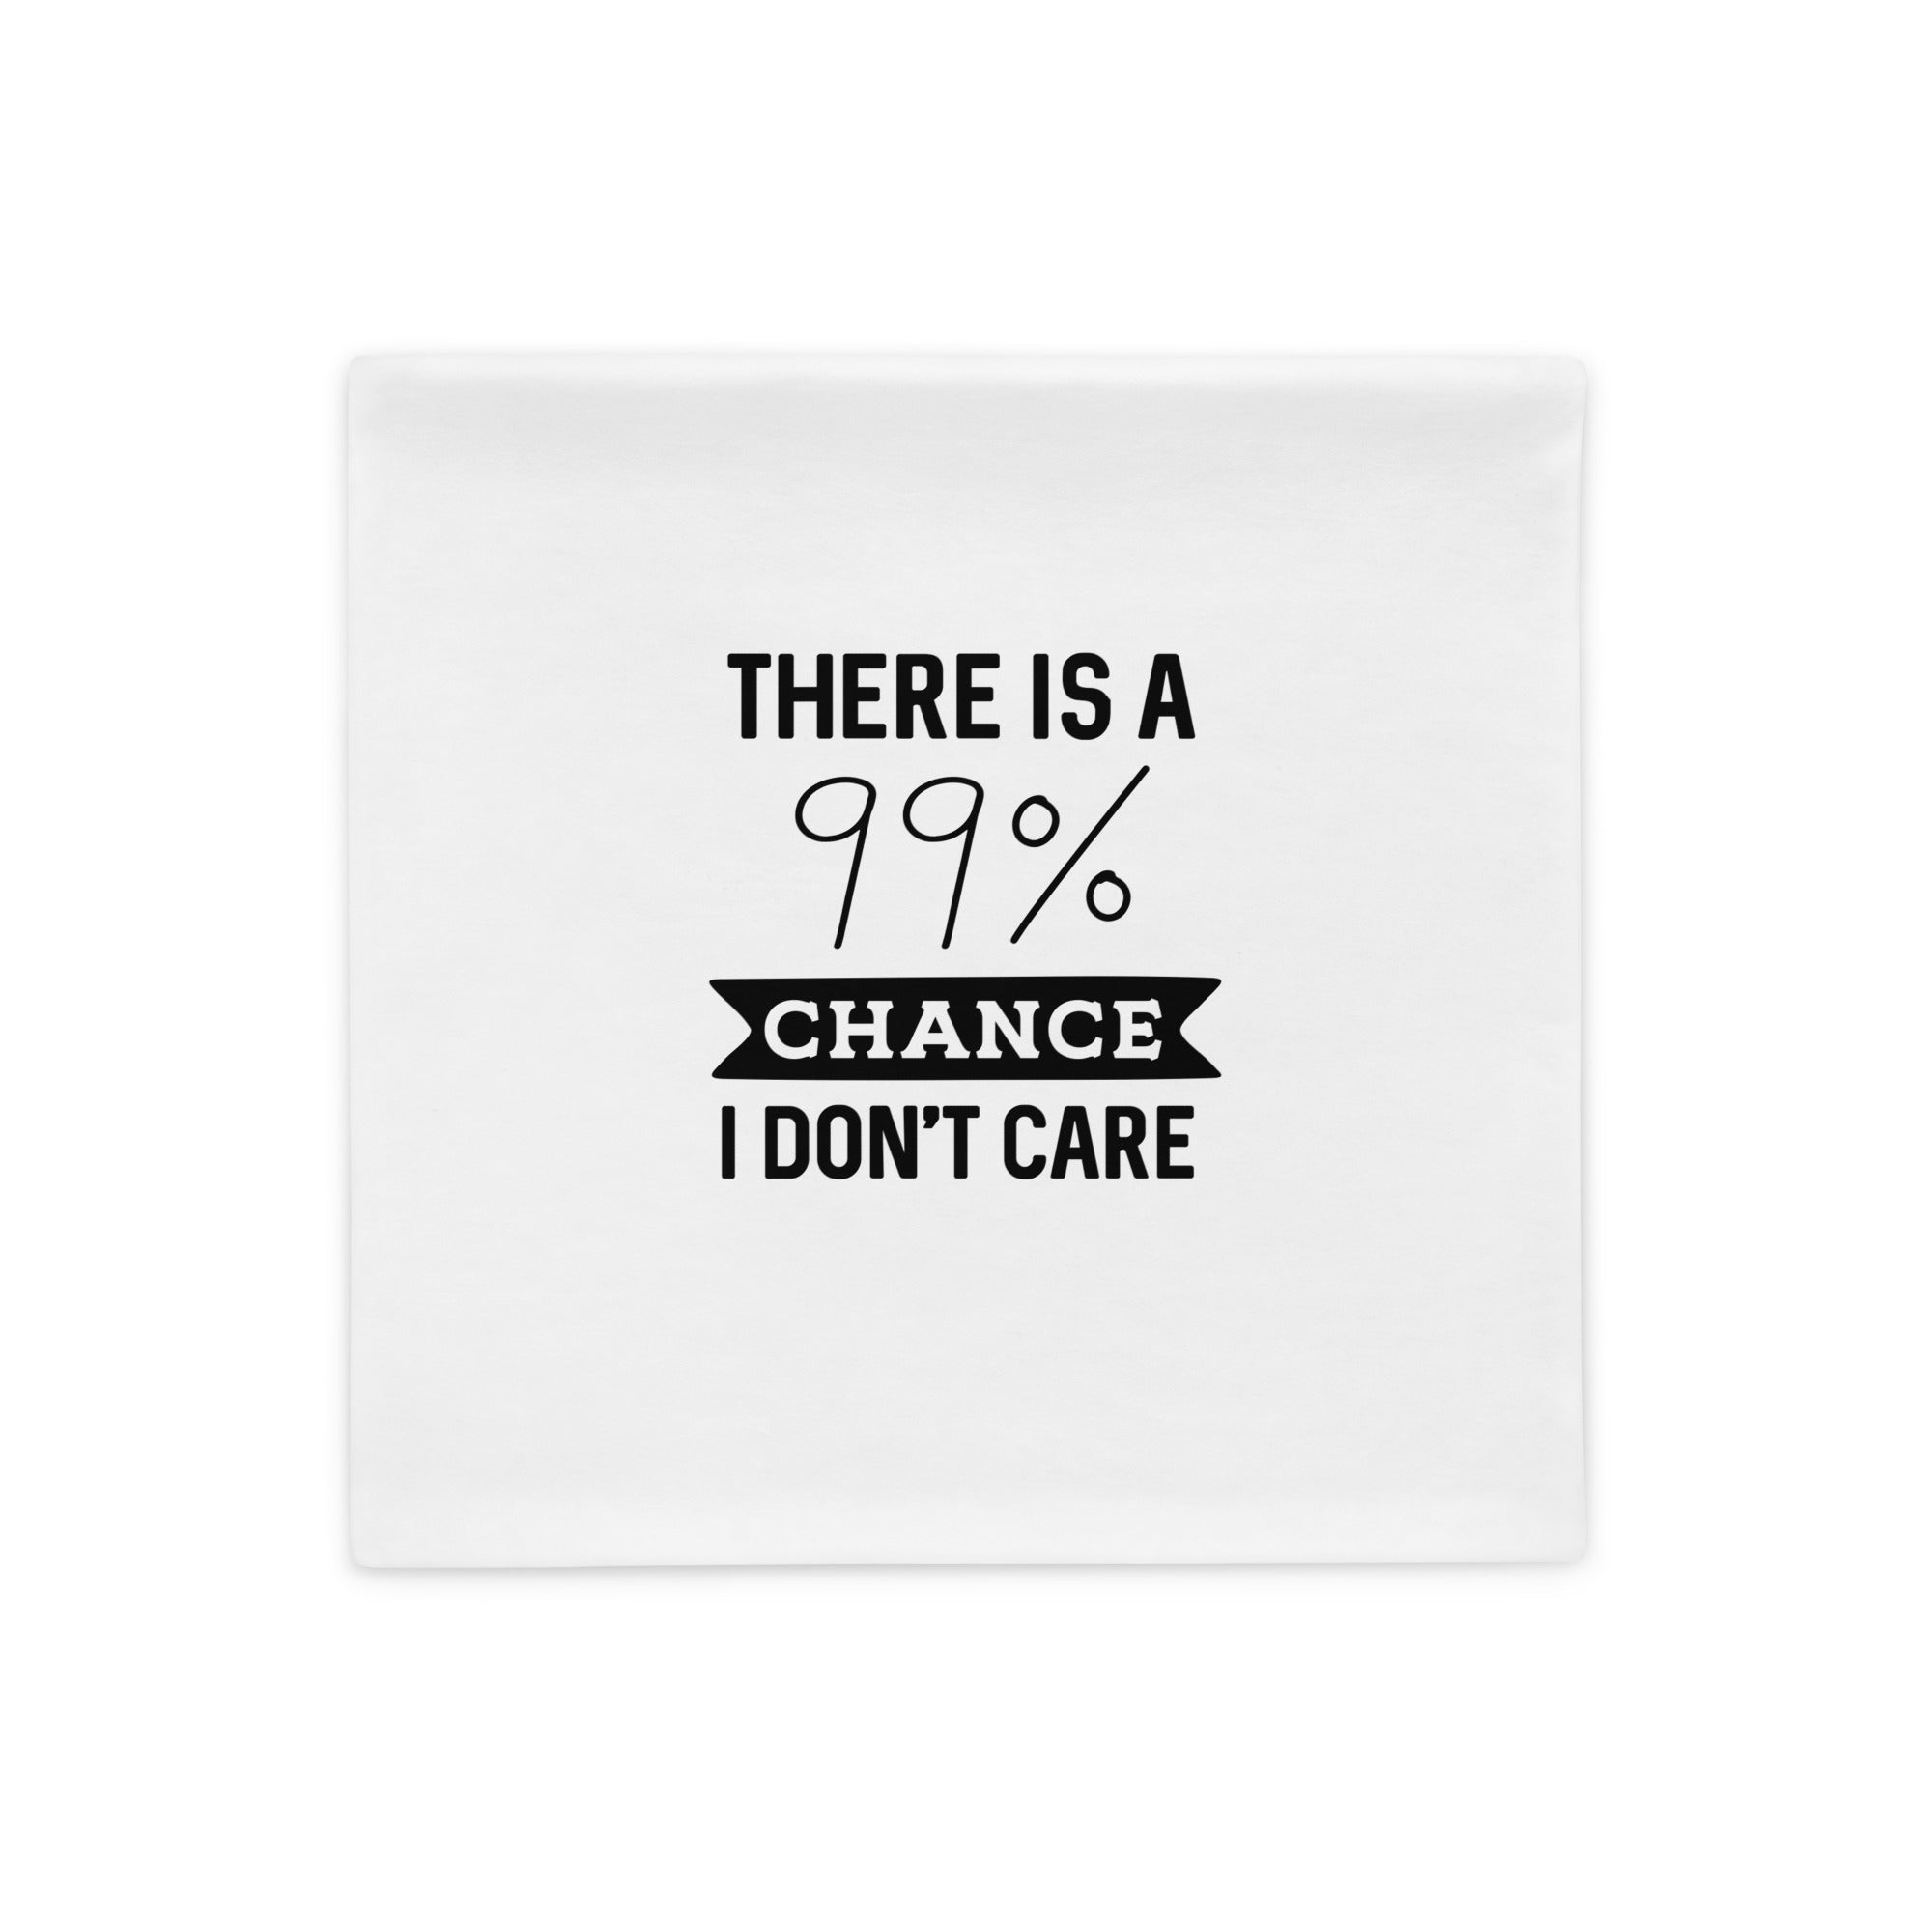 99% Chance I Don't Care - Pillow Case